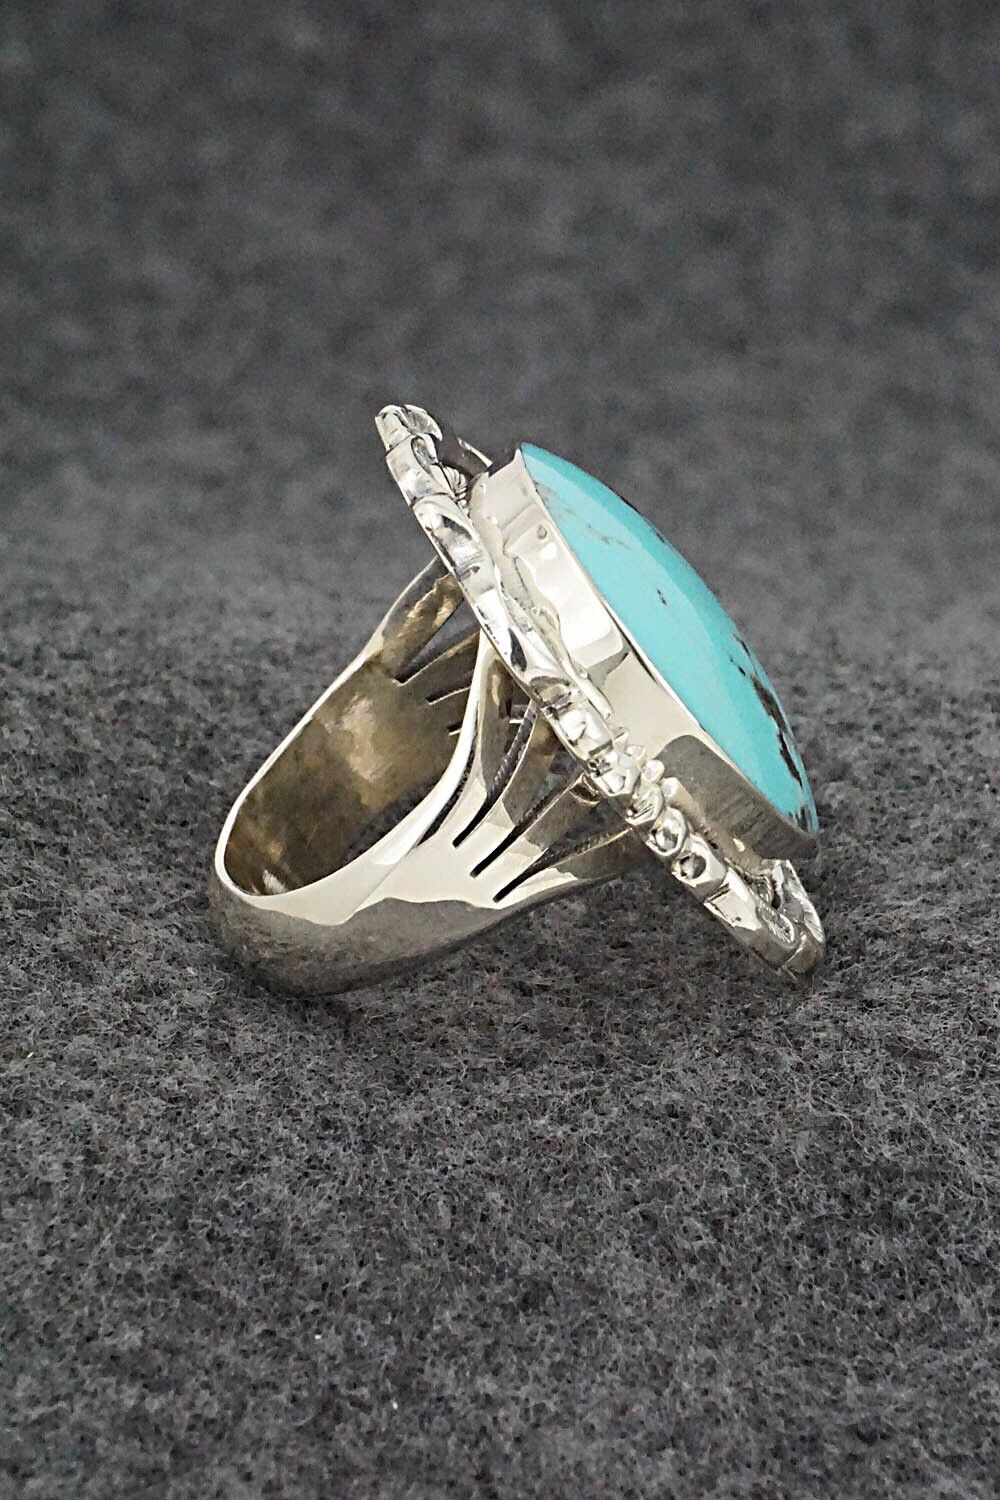 Turquoise & Sterling Silver Ring - Emerson Delgarito - Size 8